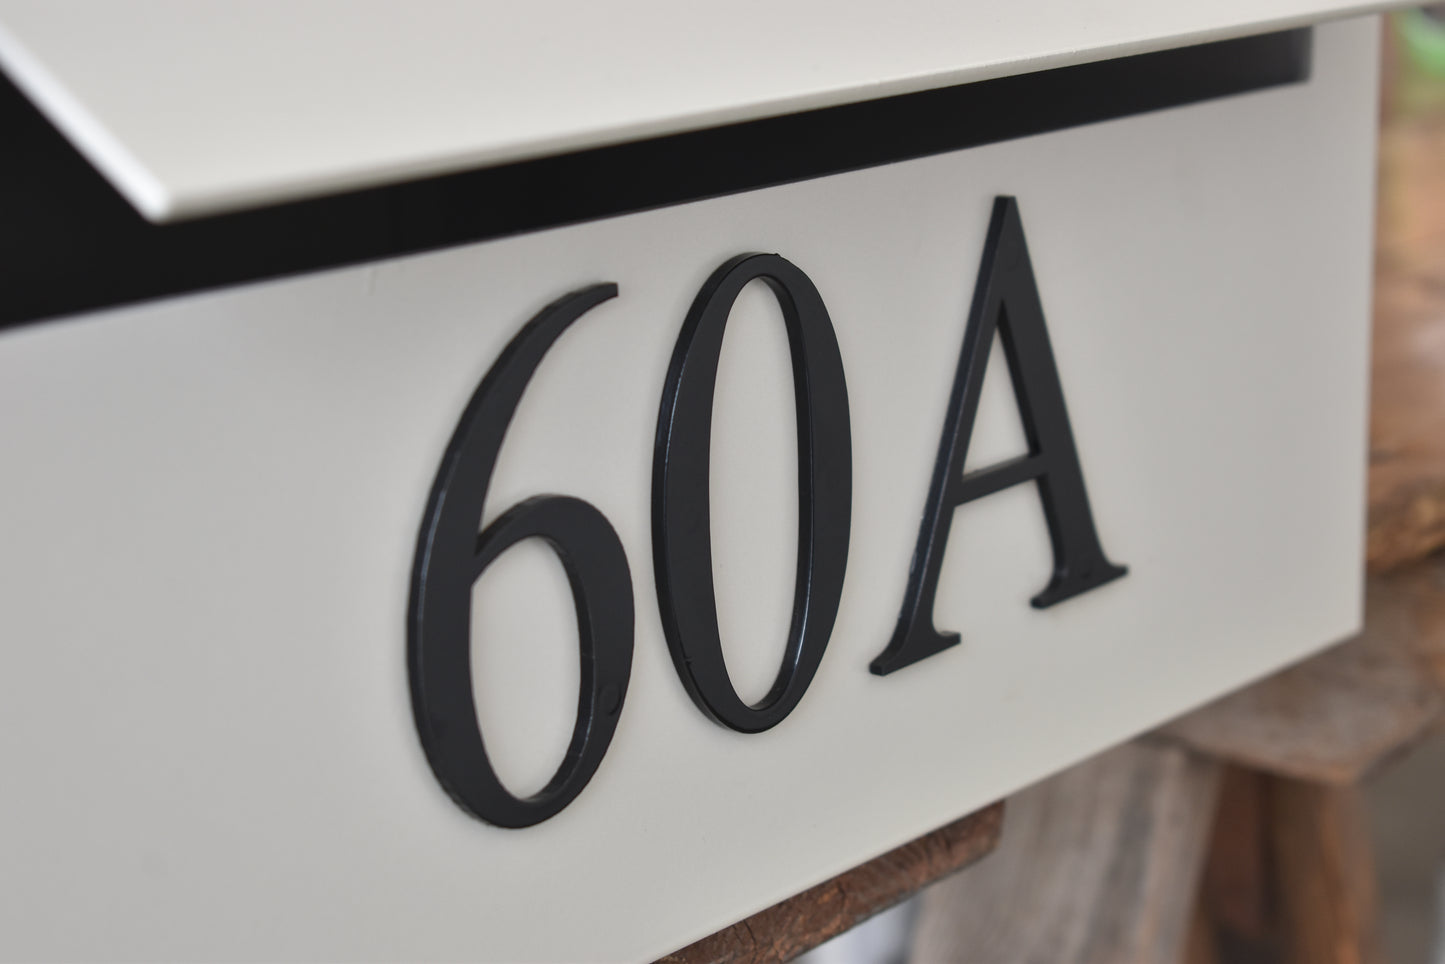 bolt on black letterbox numbers 60A